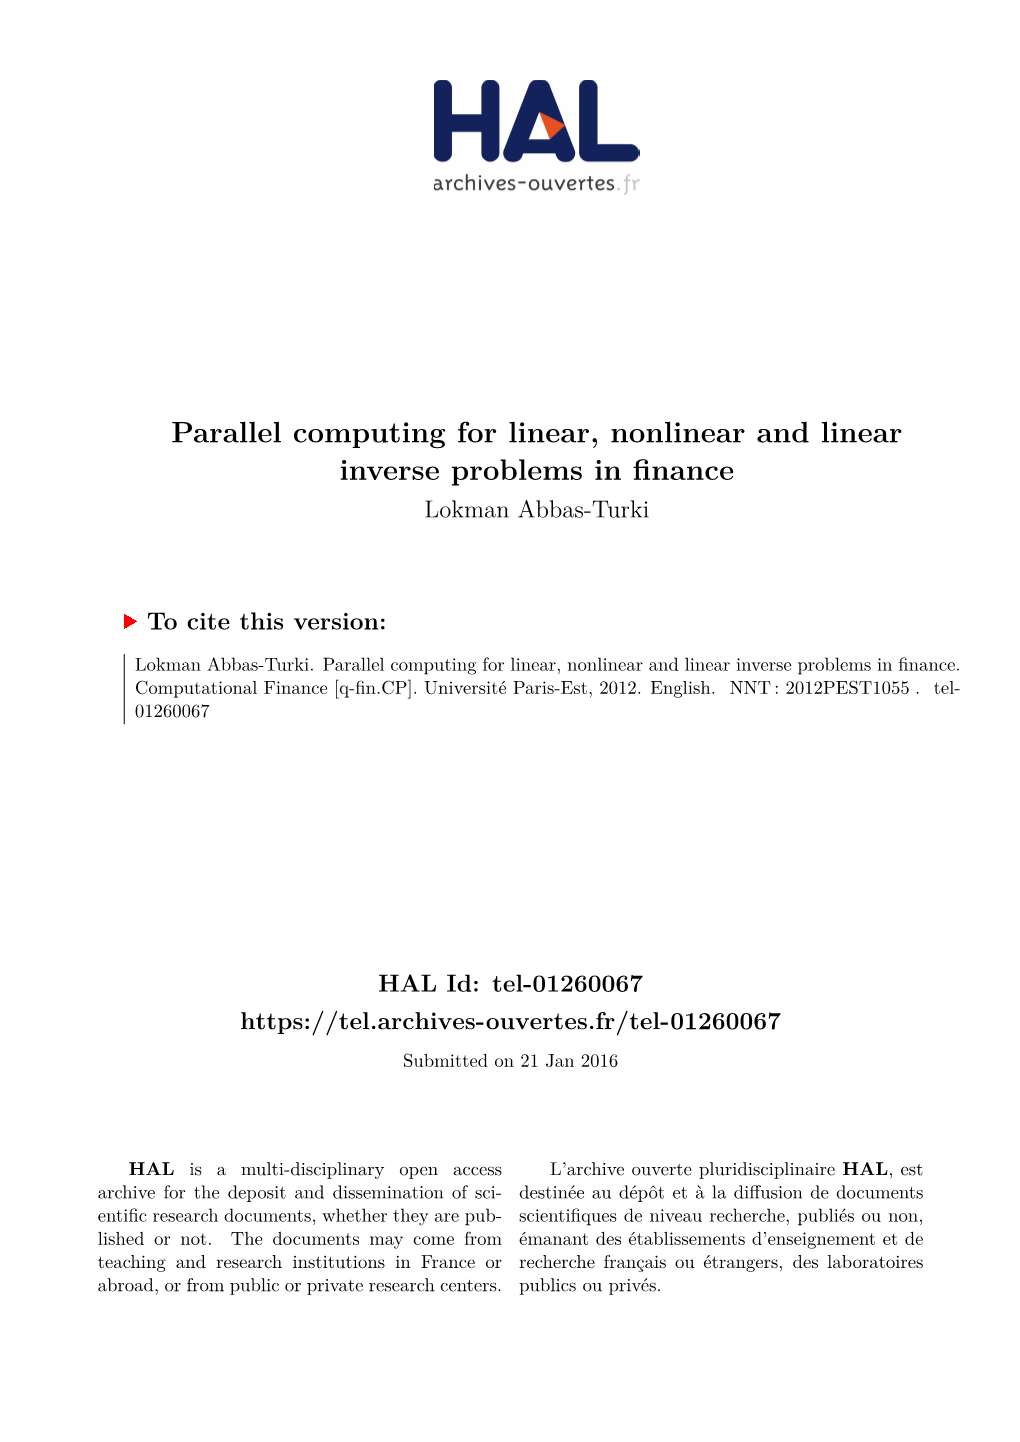 Parallel Computing for Linear, Nonlinear and Linear Inverse Problems in Finance Lokman Abbas-Turki